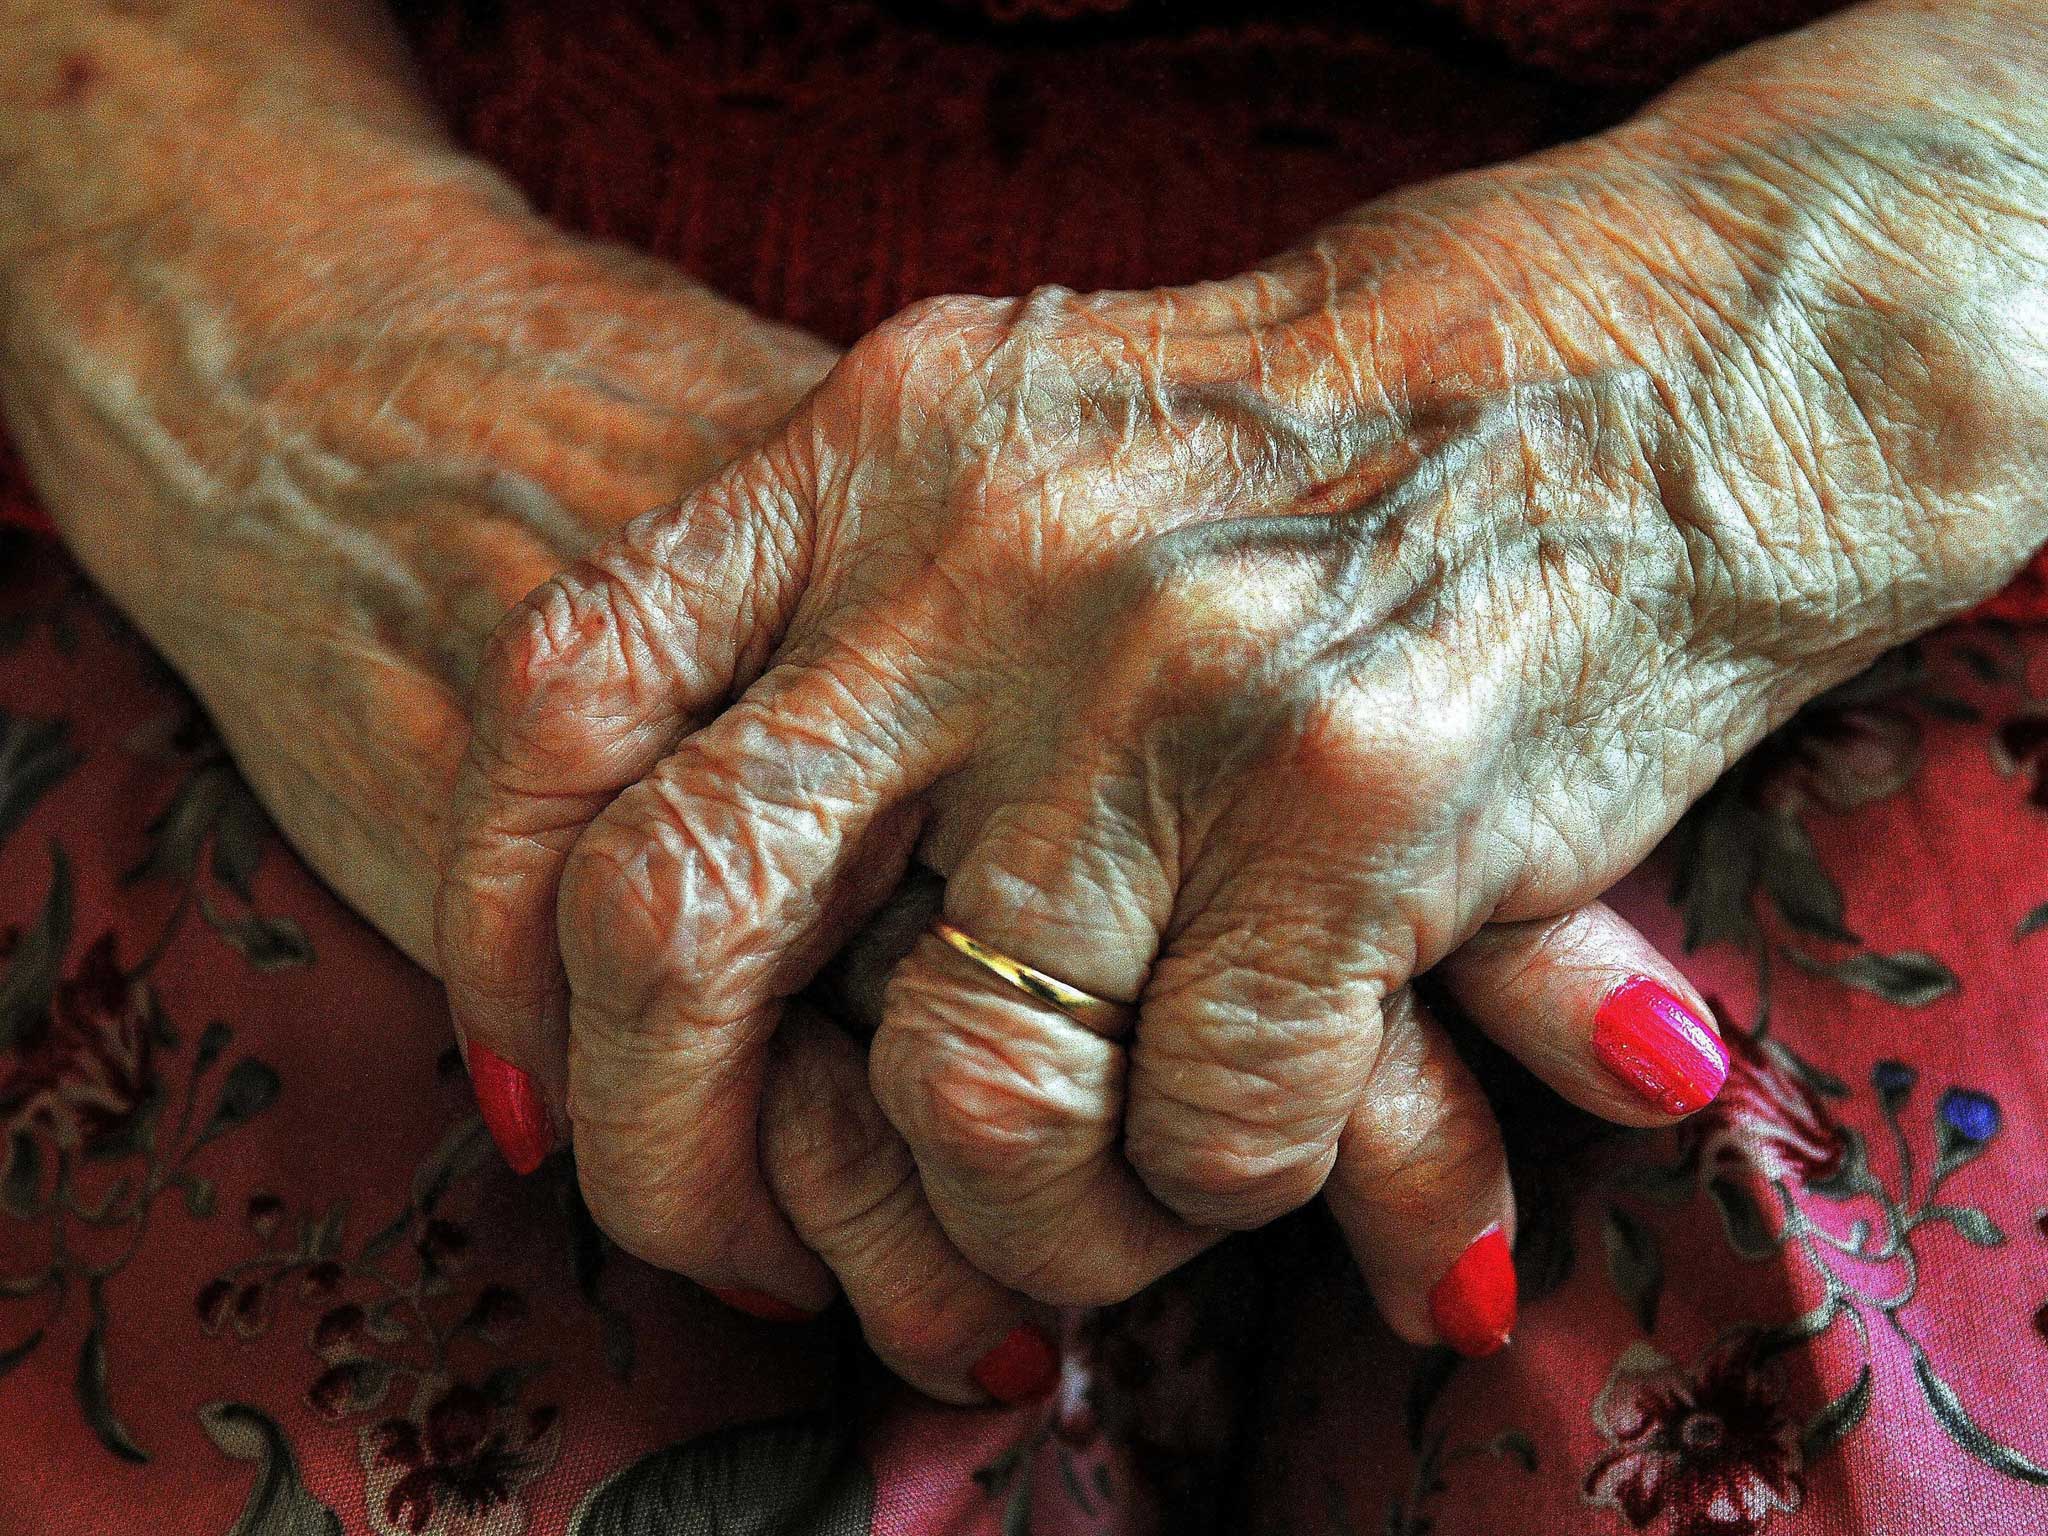 There has been a five-fold increase in the number of centenarians over the last three decades